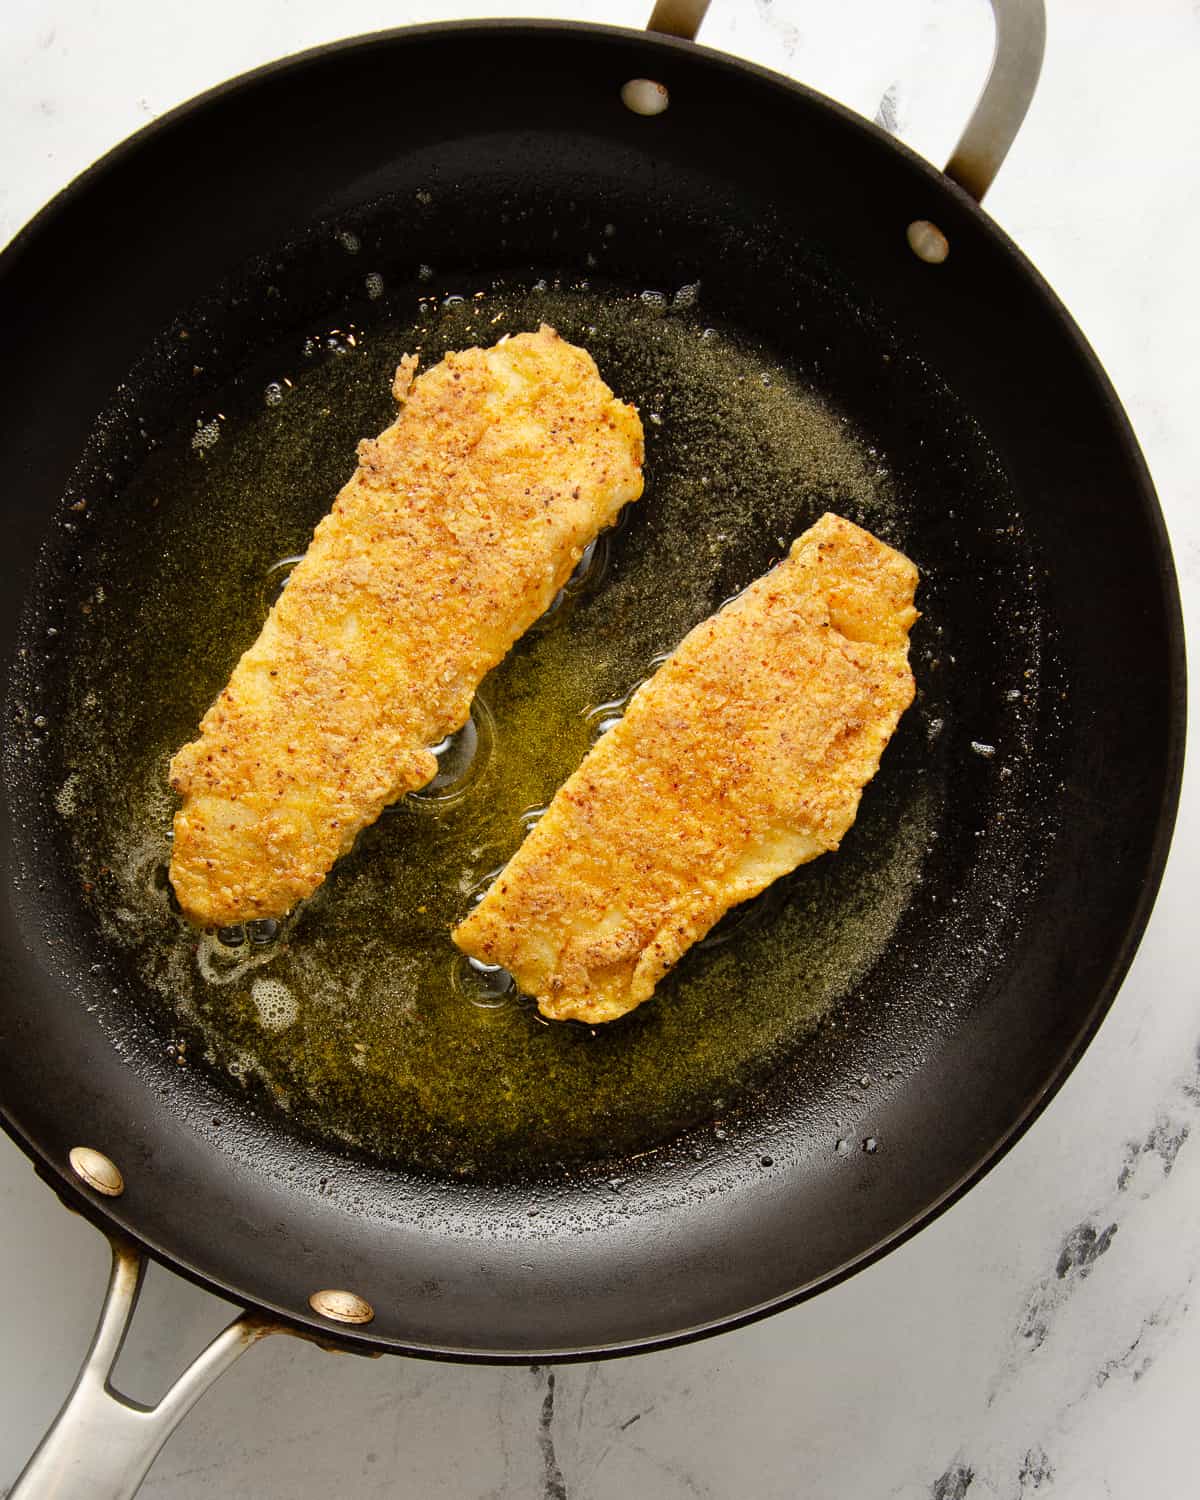 Two pieces of fried tilapia in a frying pan.